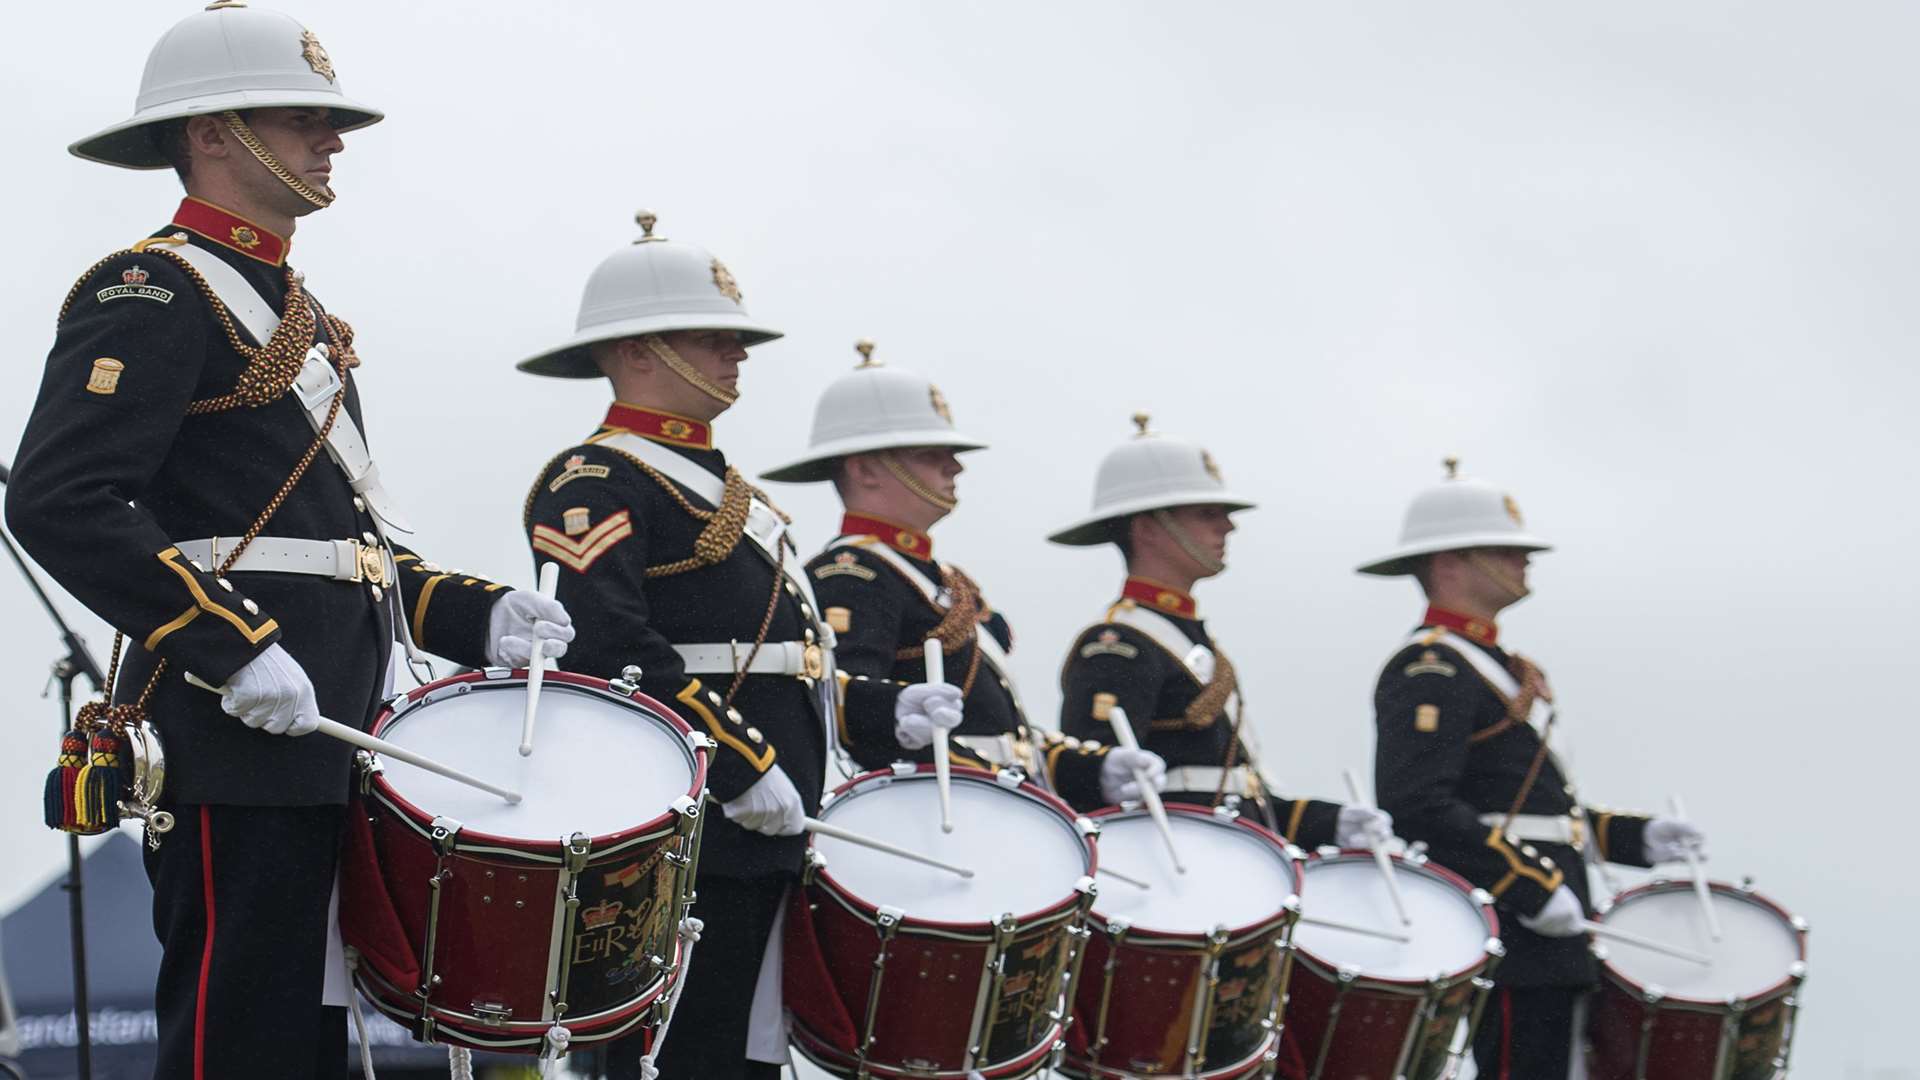 The Marines on the Green concert at Walmer last year with the Royal Marines (Porsmouth Band)